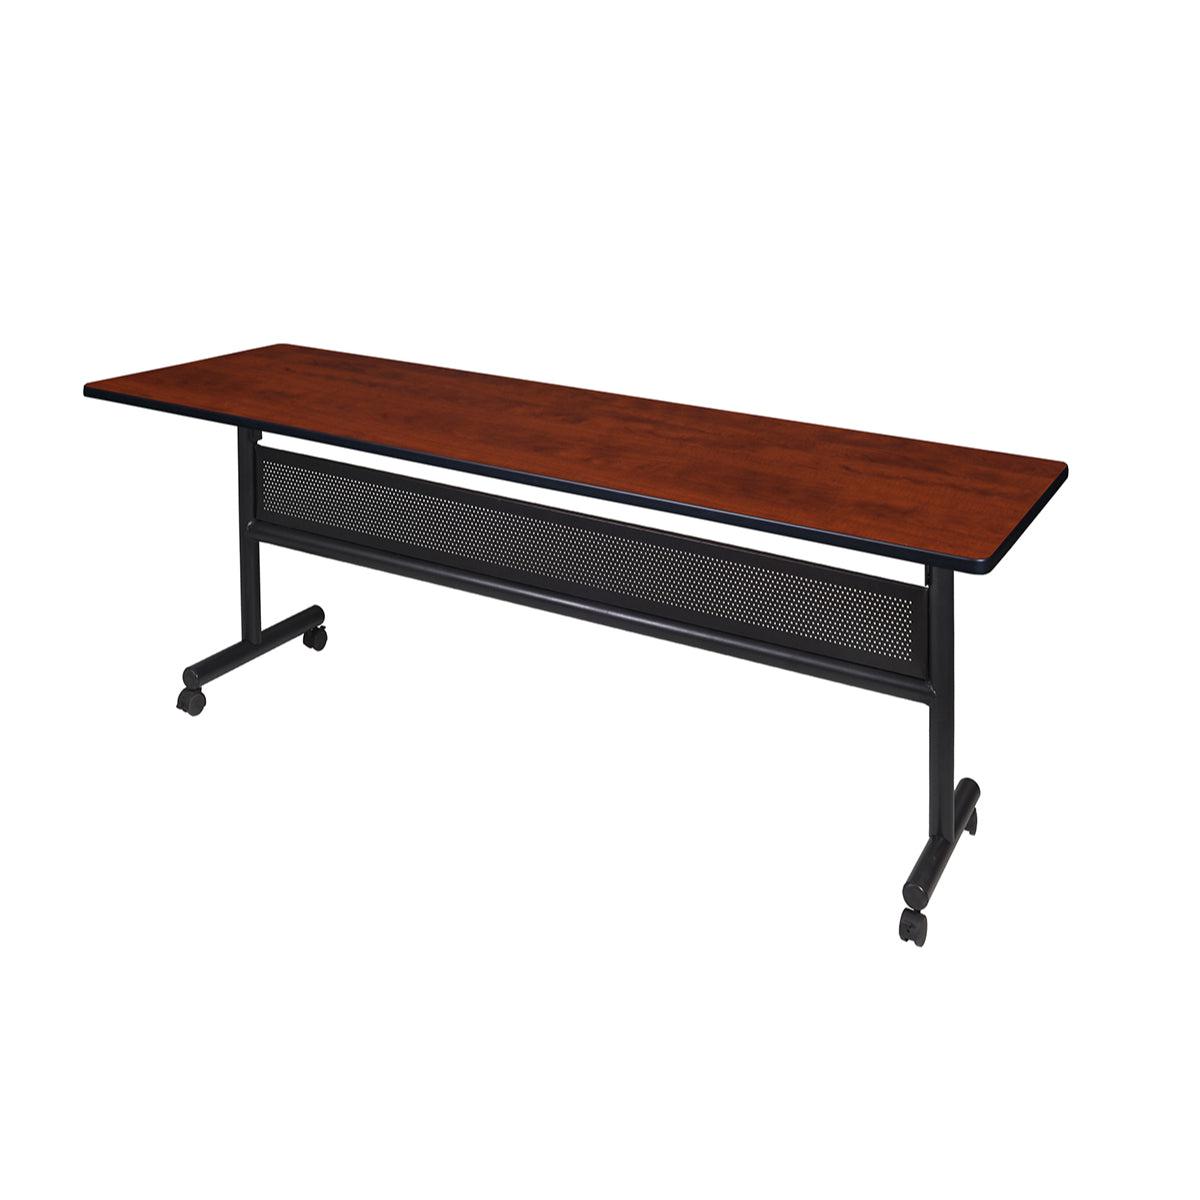 60x24 Palace Training Table With Modesty Panel Cherry/black